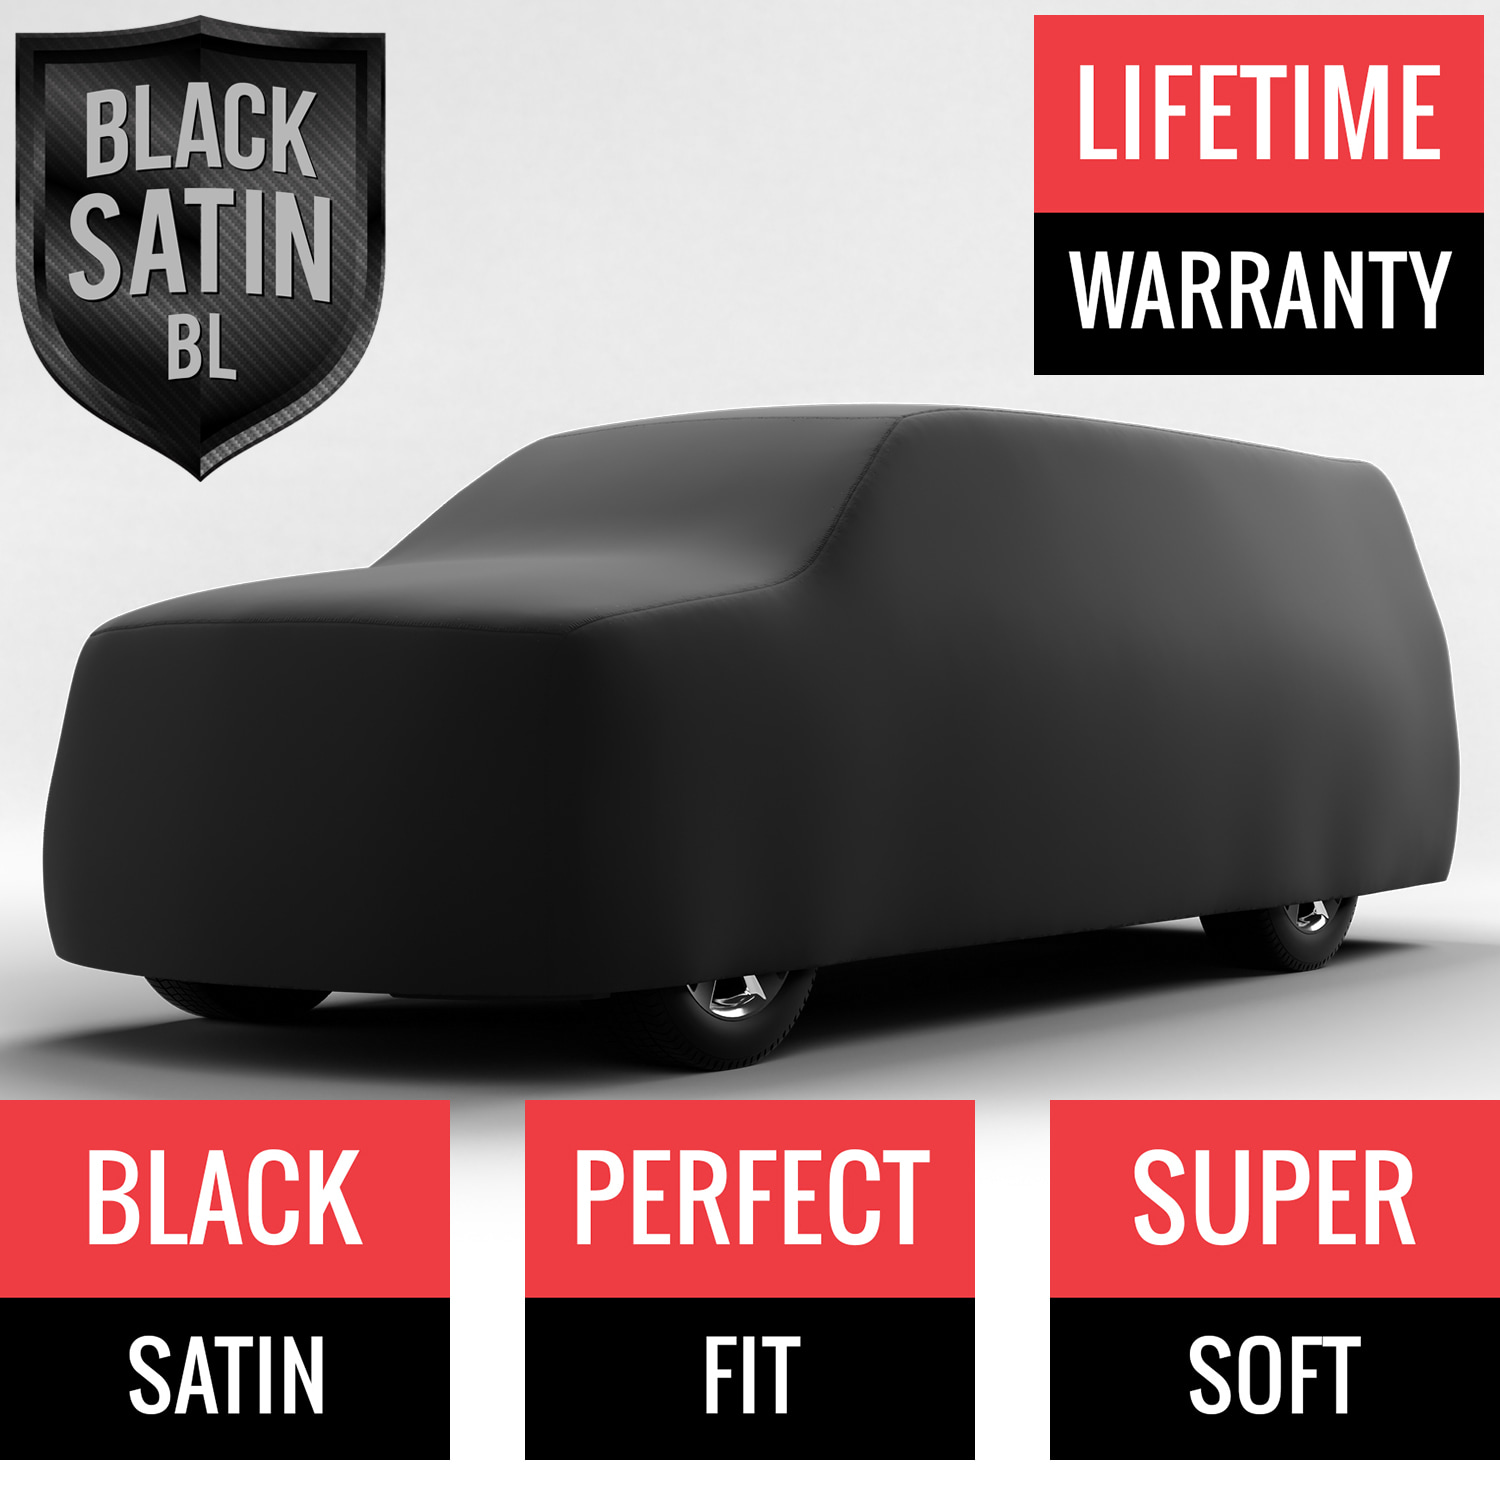 Black Satin BL - Black Car Cover for GMC C1500 1997 Regular Cab Pickup 8.0 Feet Bed with Camper Shell